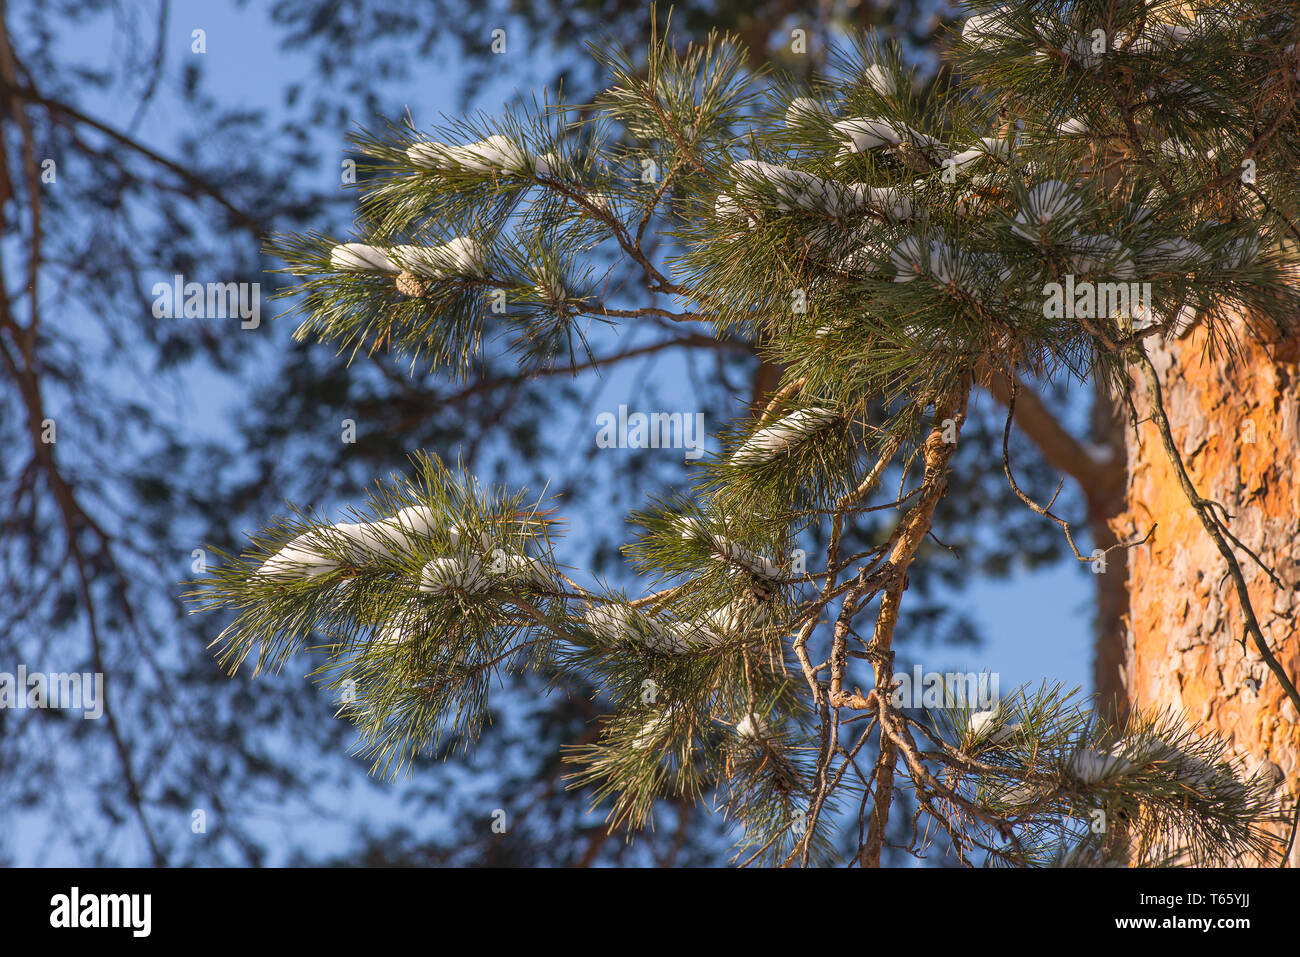 Spruce branch is heavily covered with fresh snow against the blue sky. Stock Photo